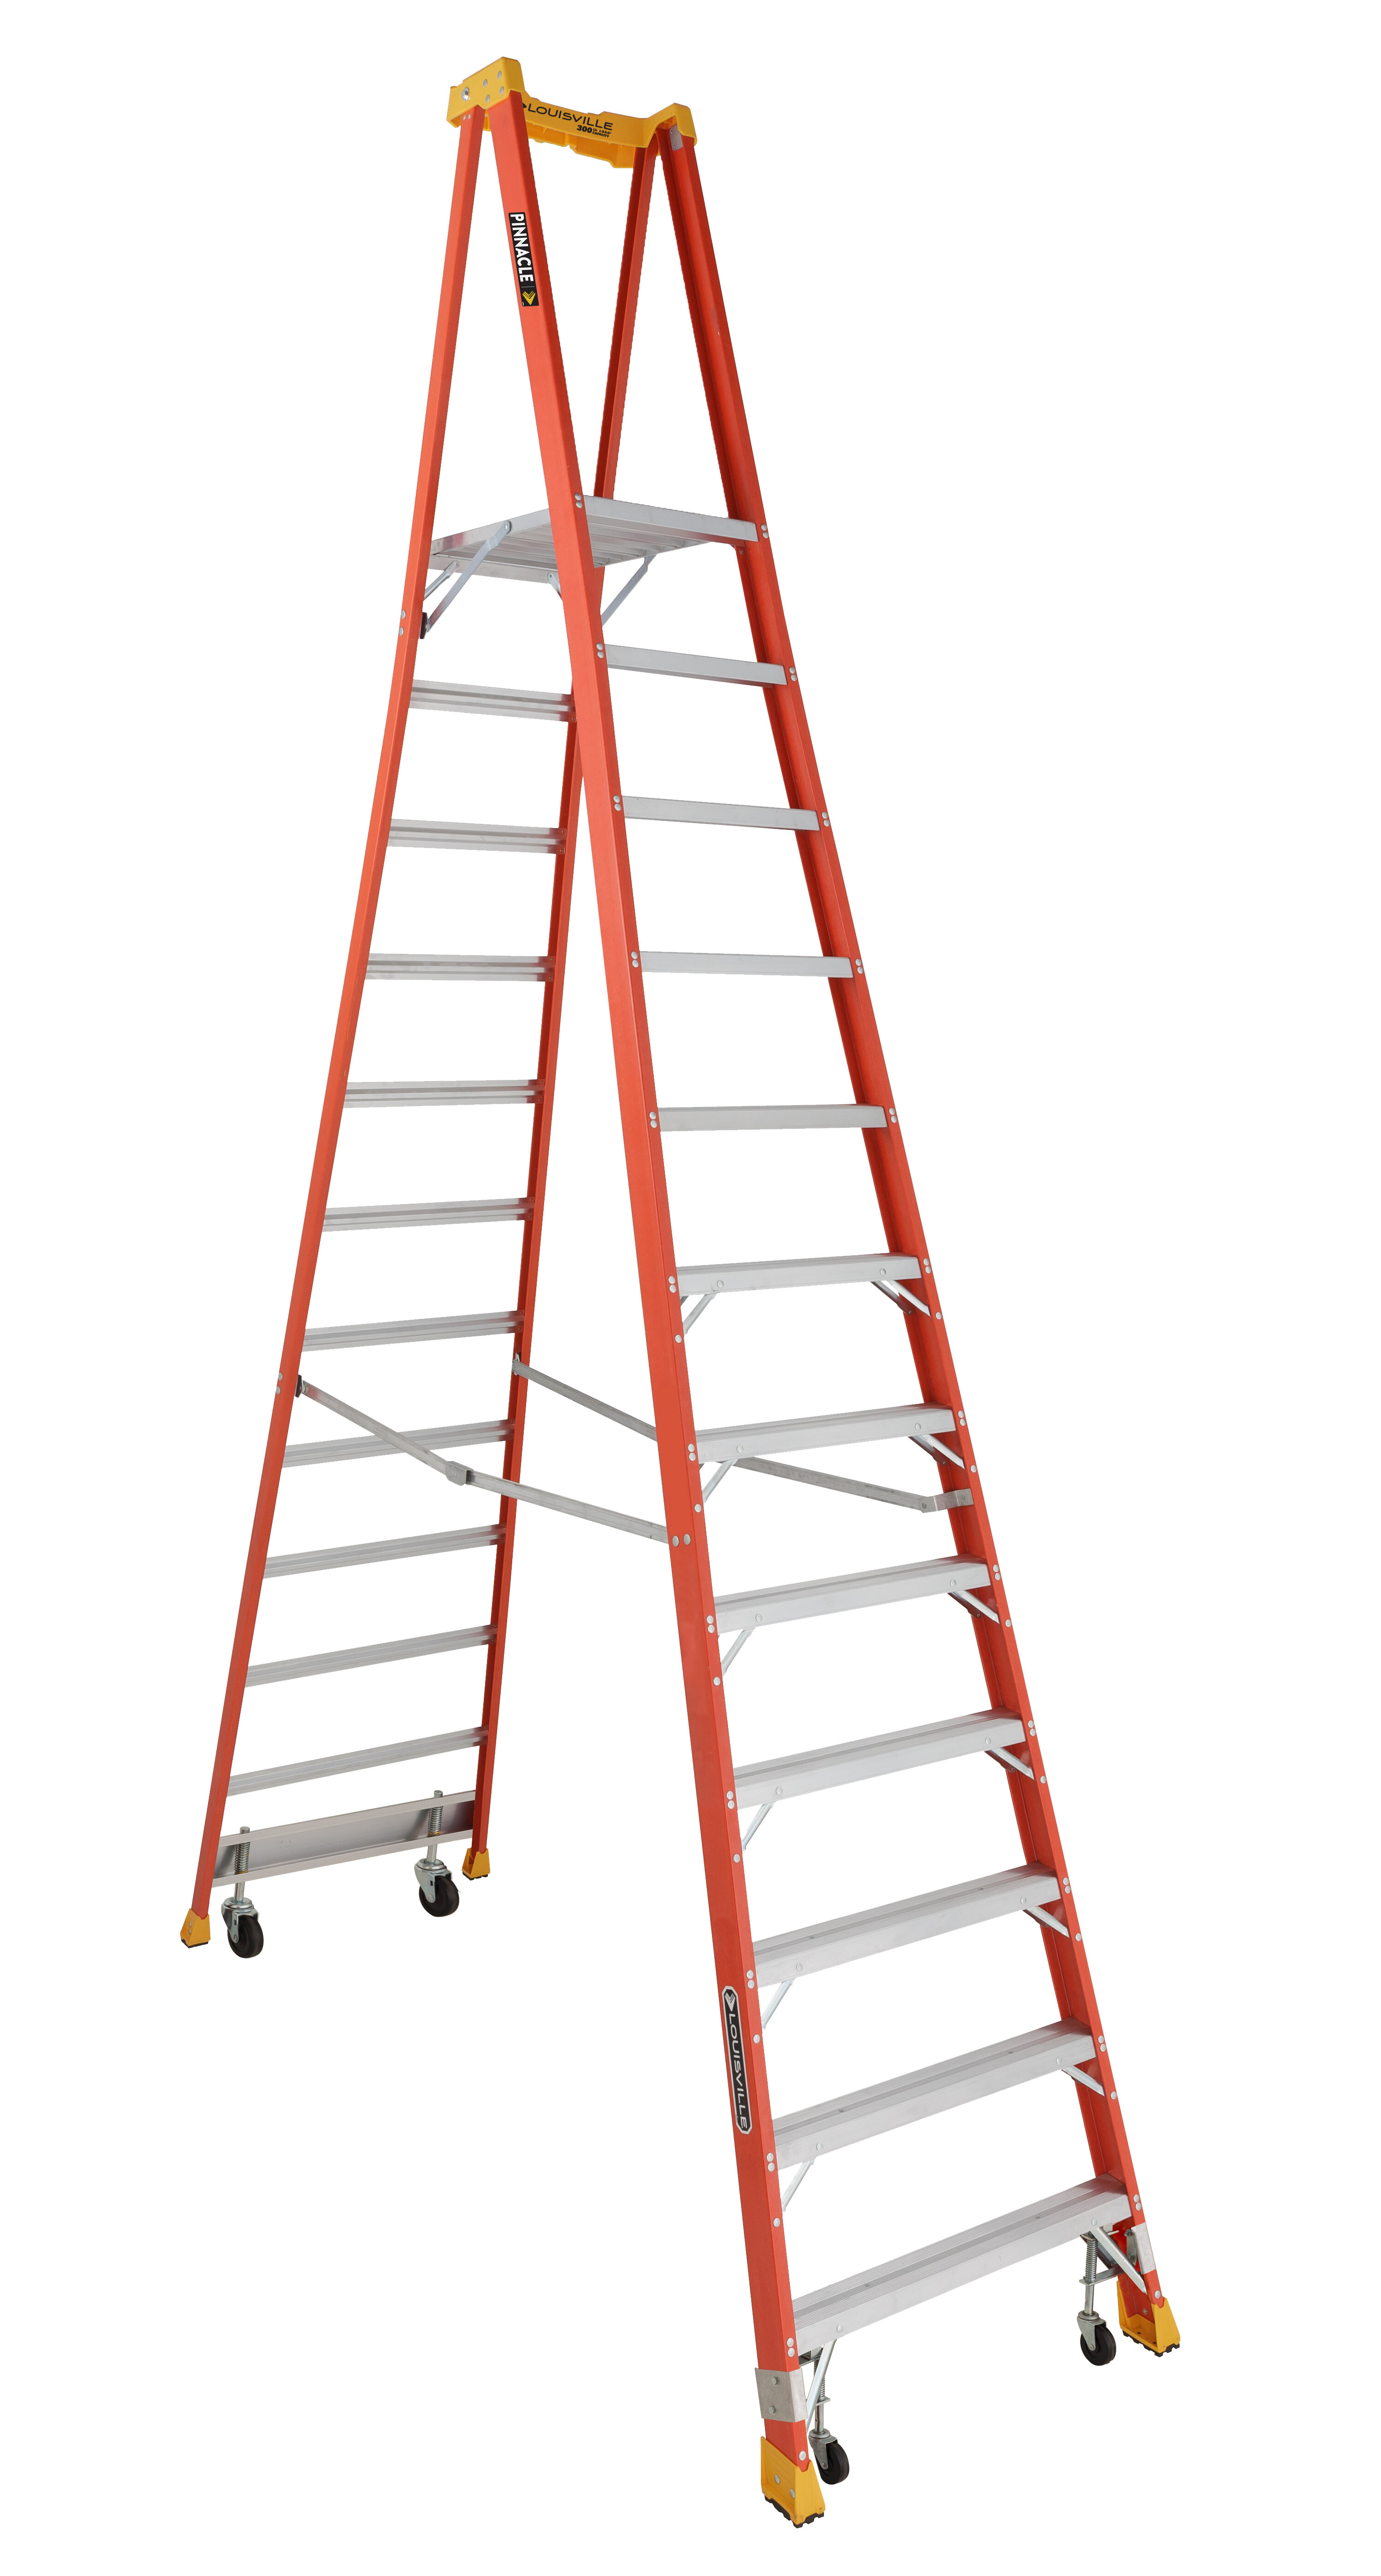 Louisville Ladder 12 ft. Fiberglass Pinnacle Platform Ladder with 300 lbs.  Load Capacity Type IA Duty Rating FXP1712 - The Home Depot